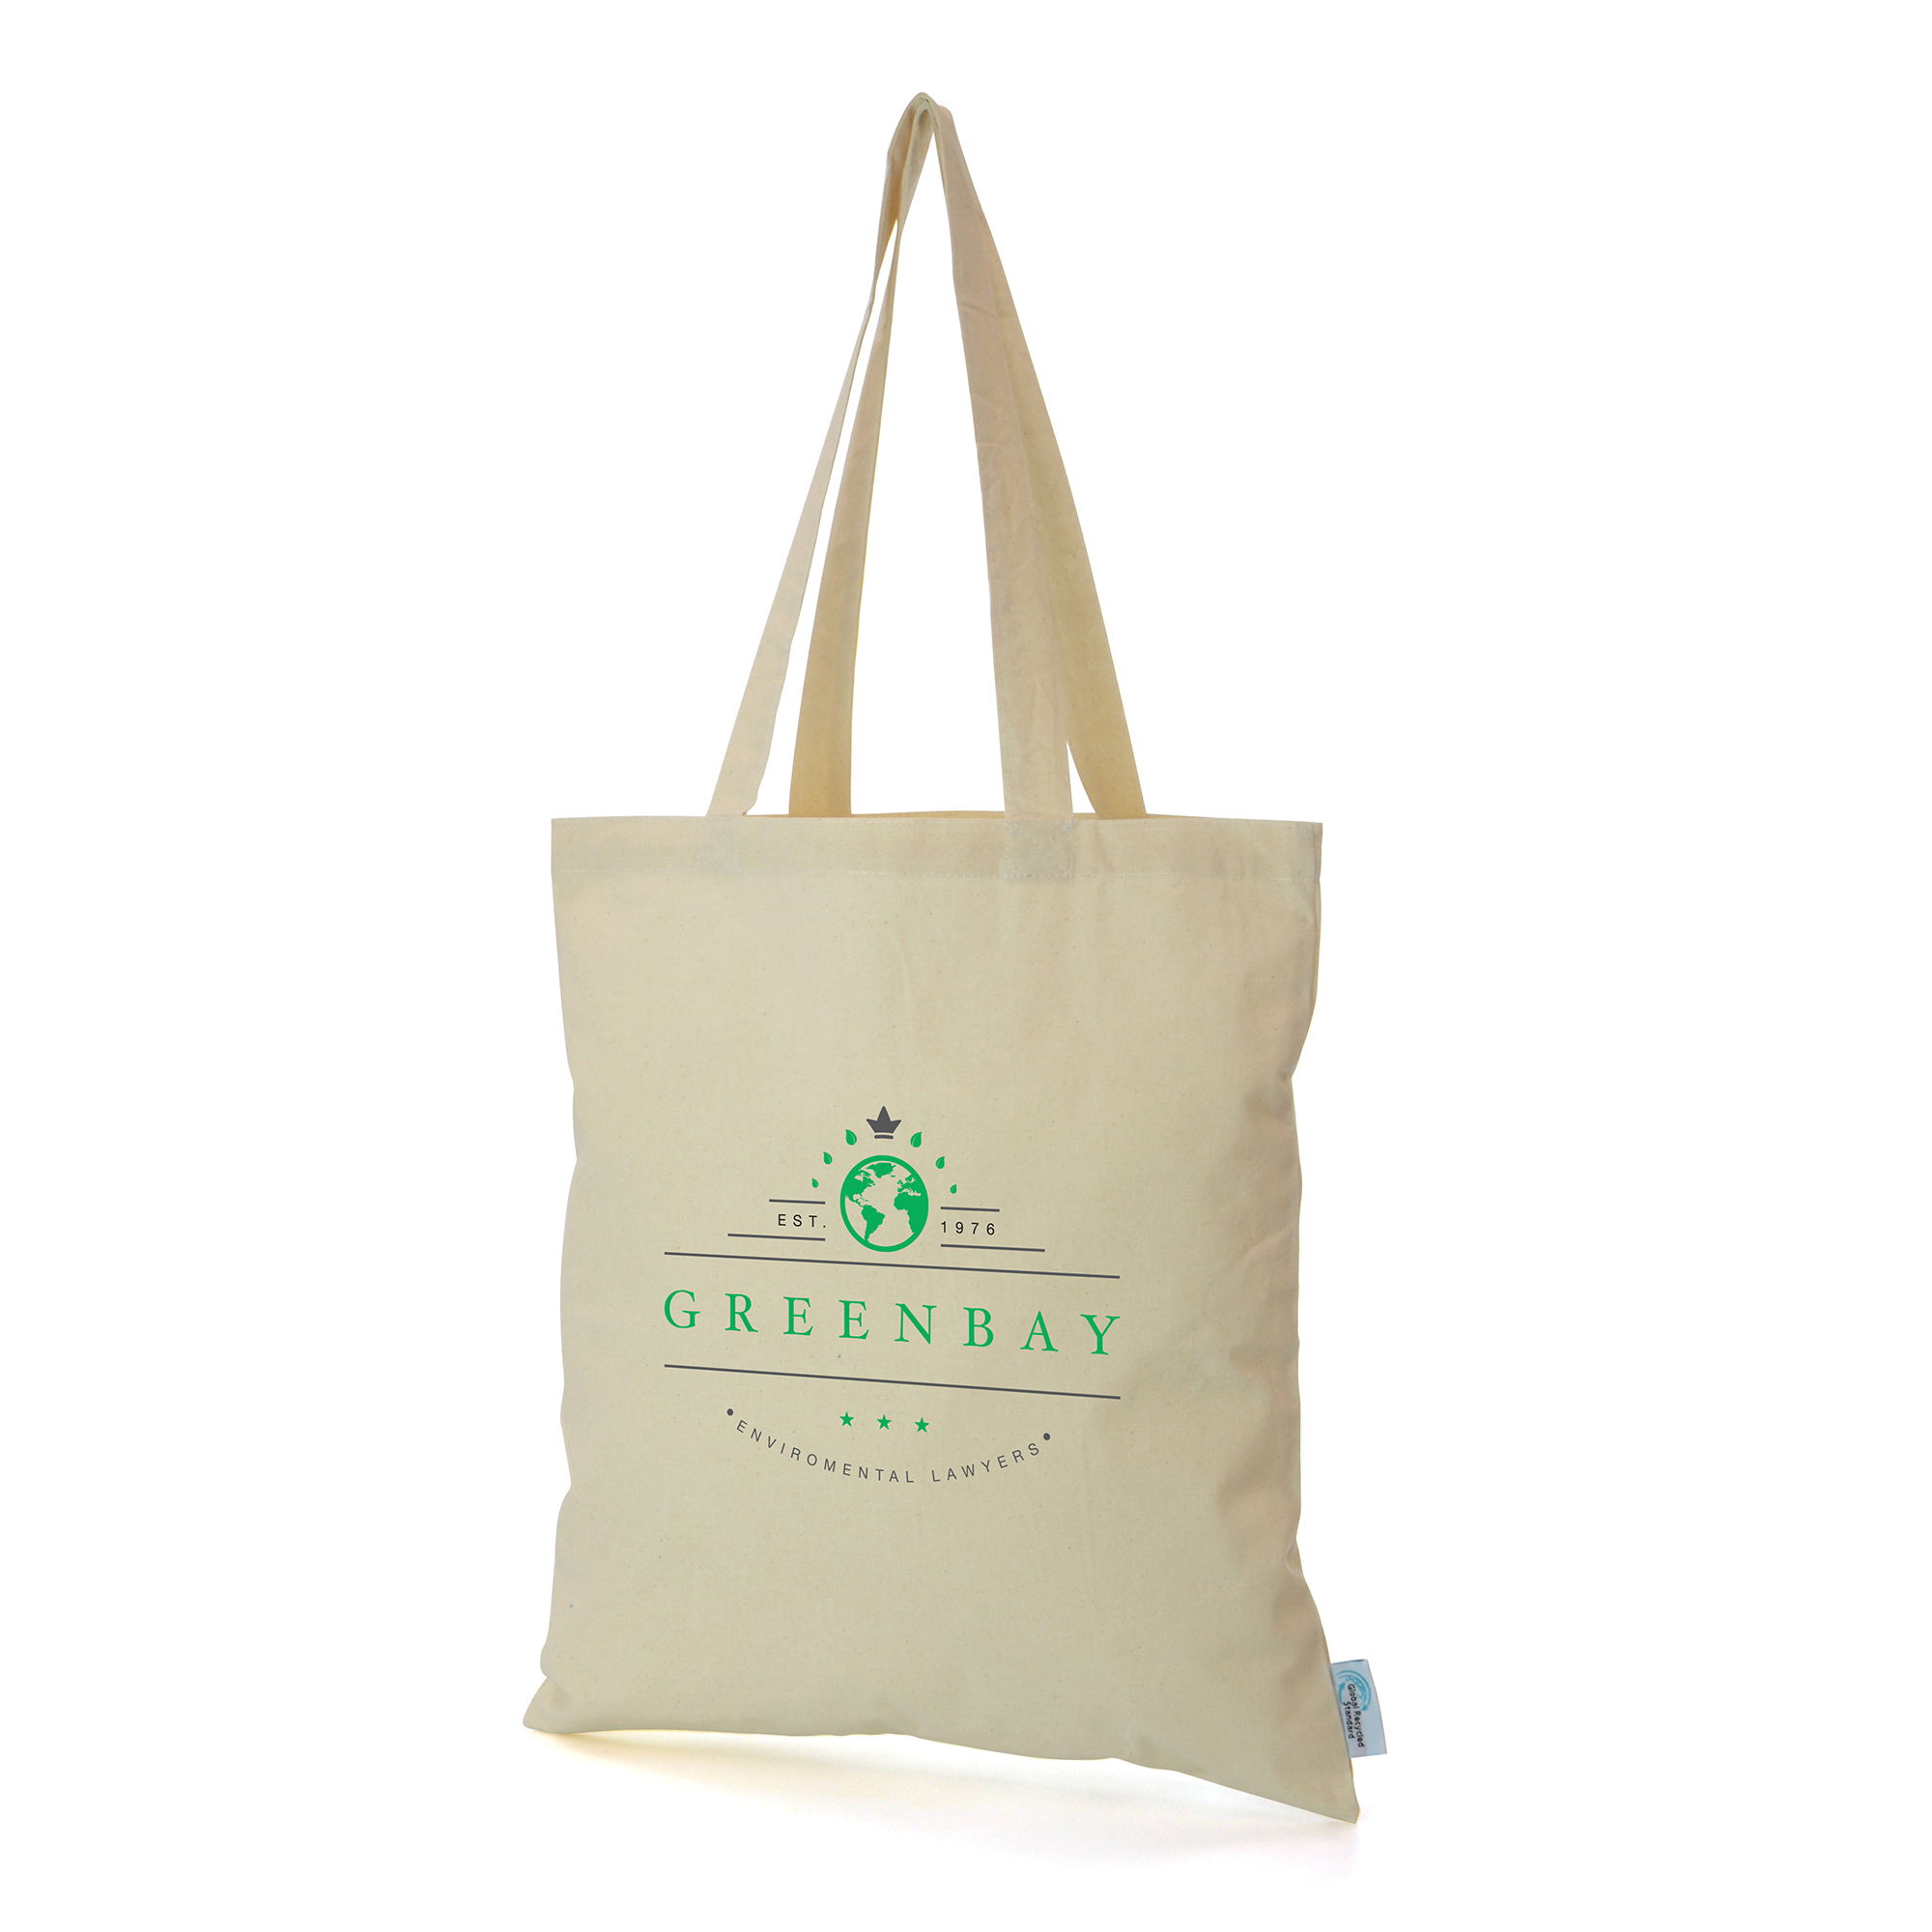 5oz 50% recycled cotton shopper with handy long handles and a super branding area. GRS certified.